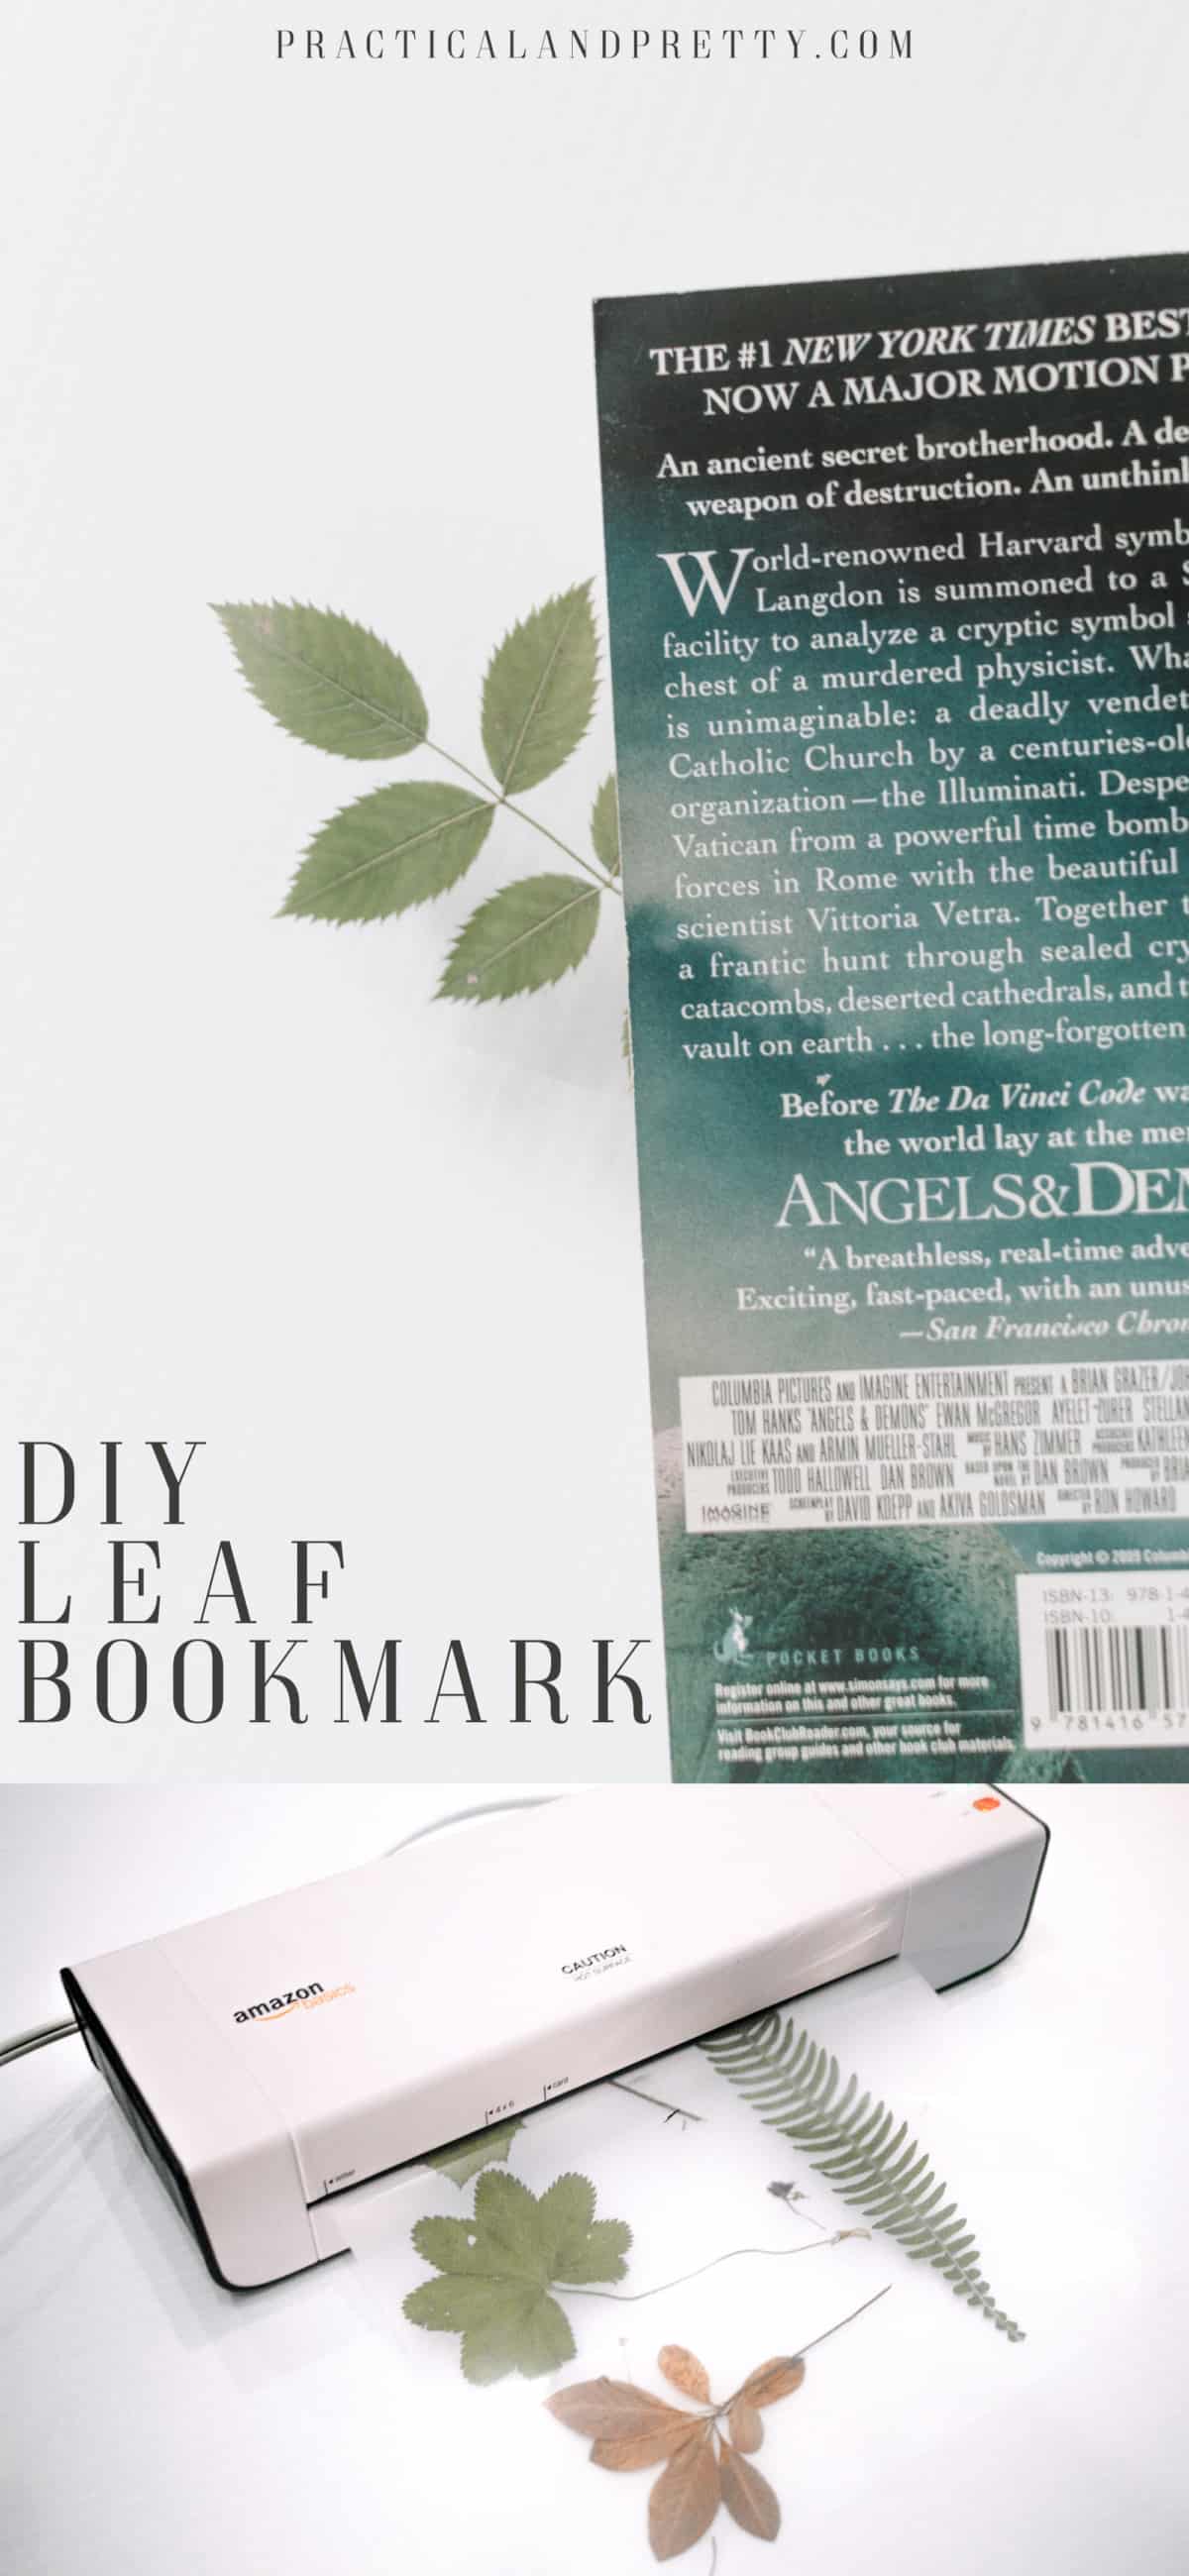 Capture the greenery of your favorite location with this simple DIY leaf bookmark tutorial. A great way bring some outside greenery into your home.